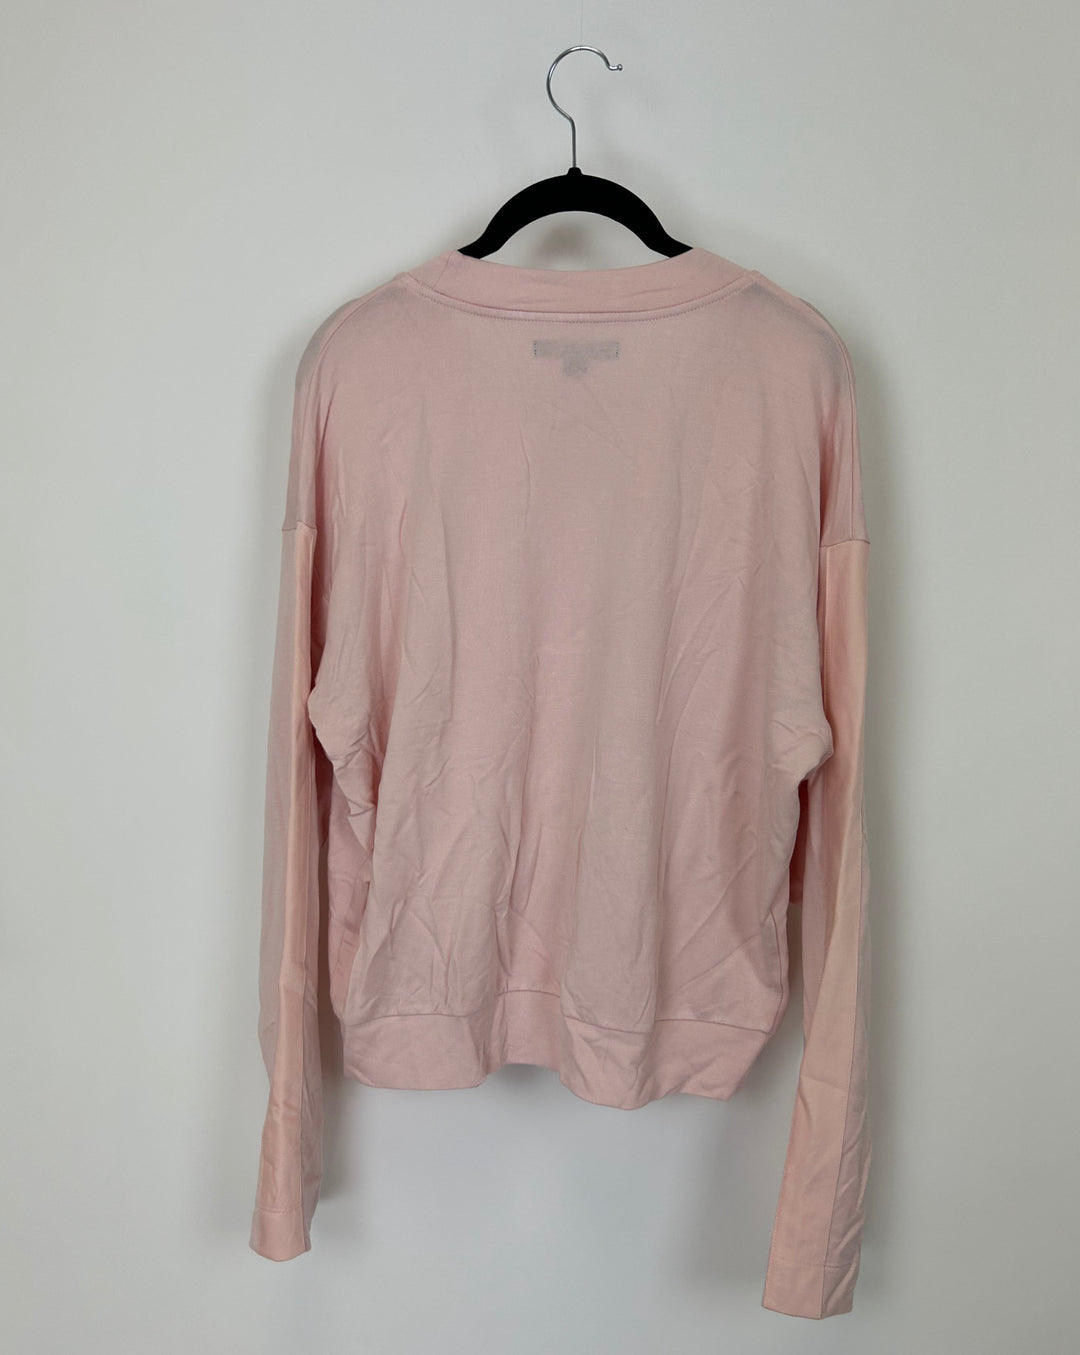 Baby Pink Long Sleeve Top - Small